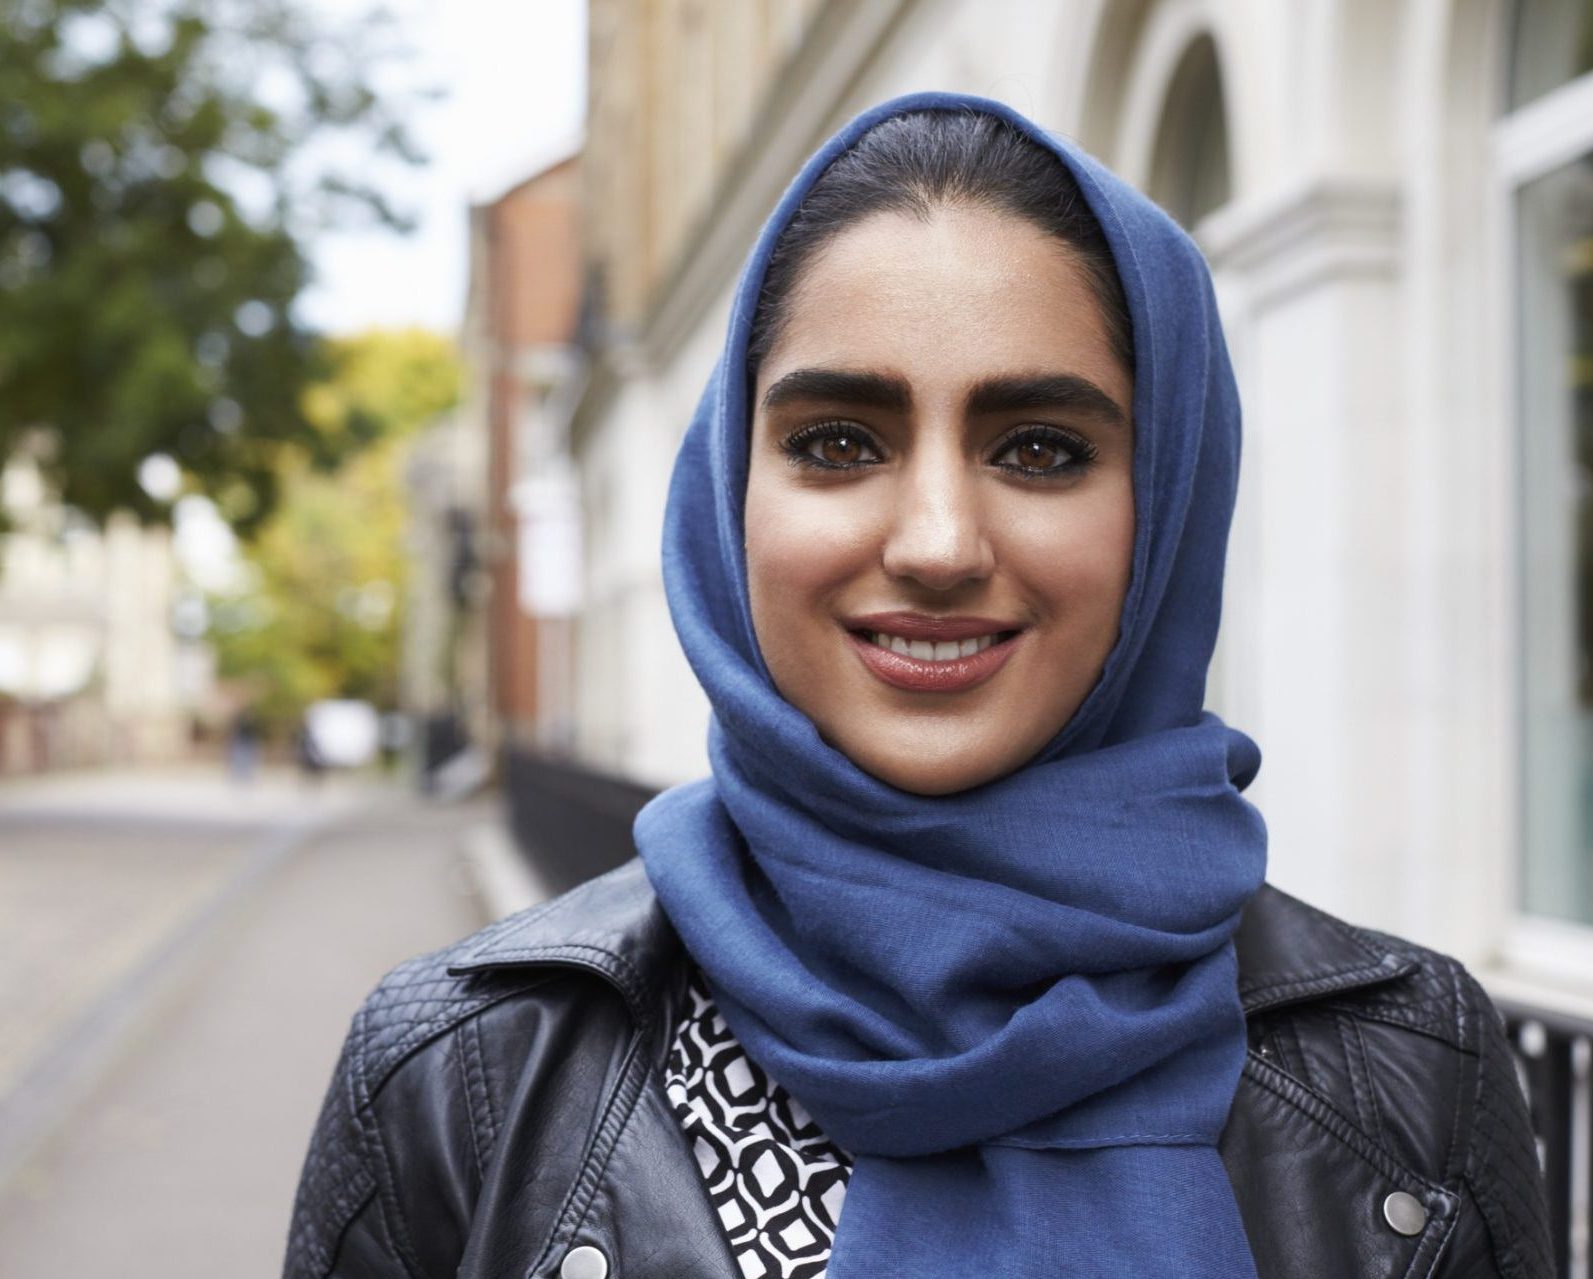 the photo shows a woman wearing a blue hijab with black hair and brown eyes standing outside a building and smiling straight at the camera